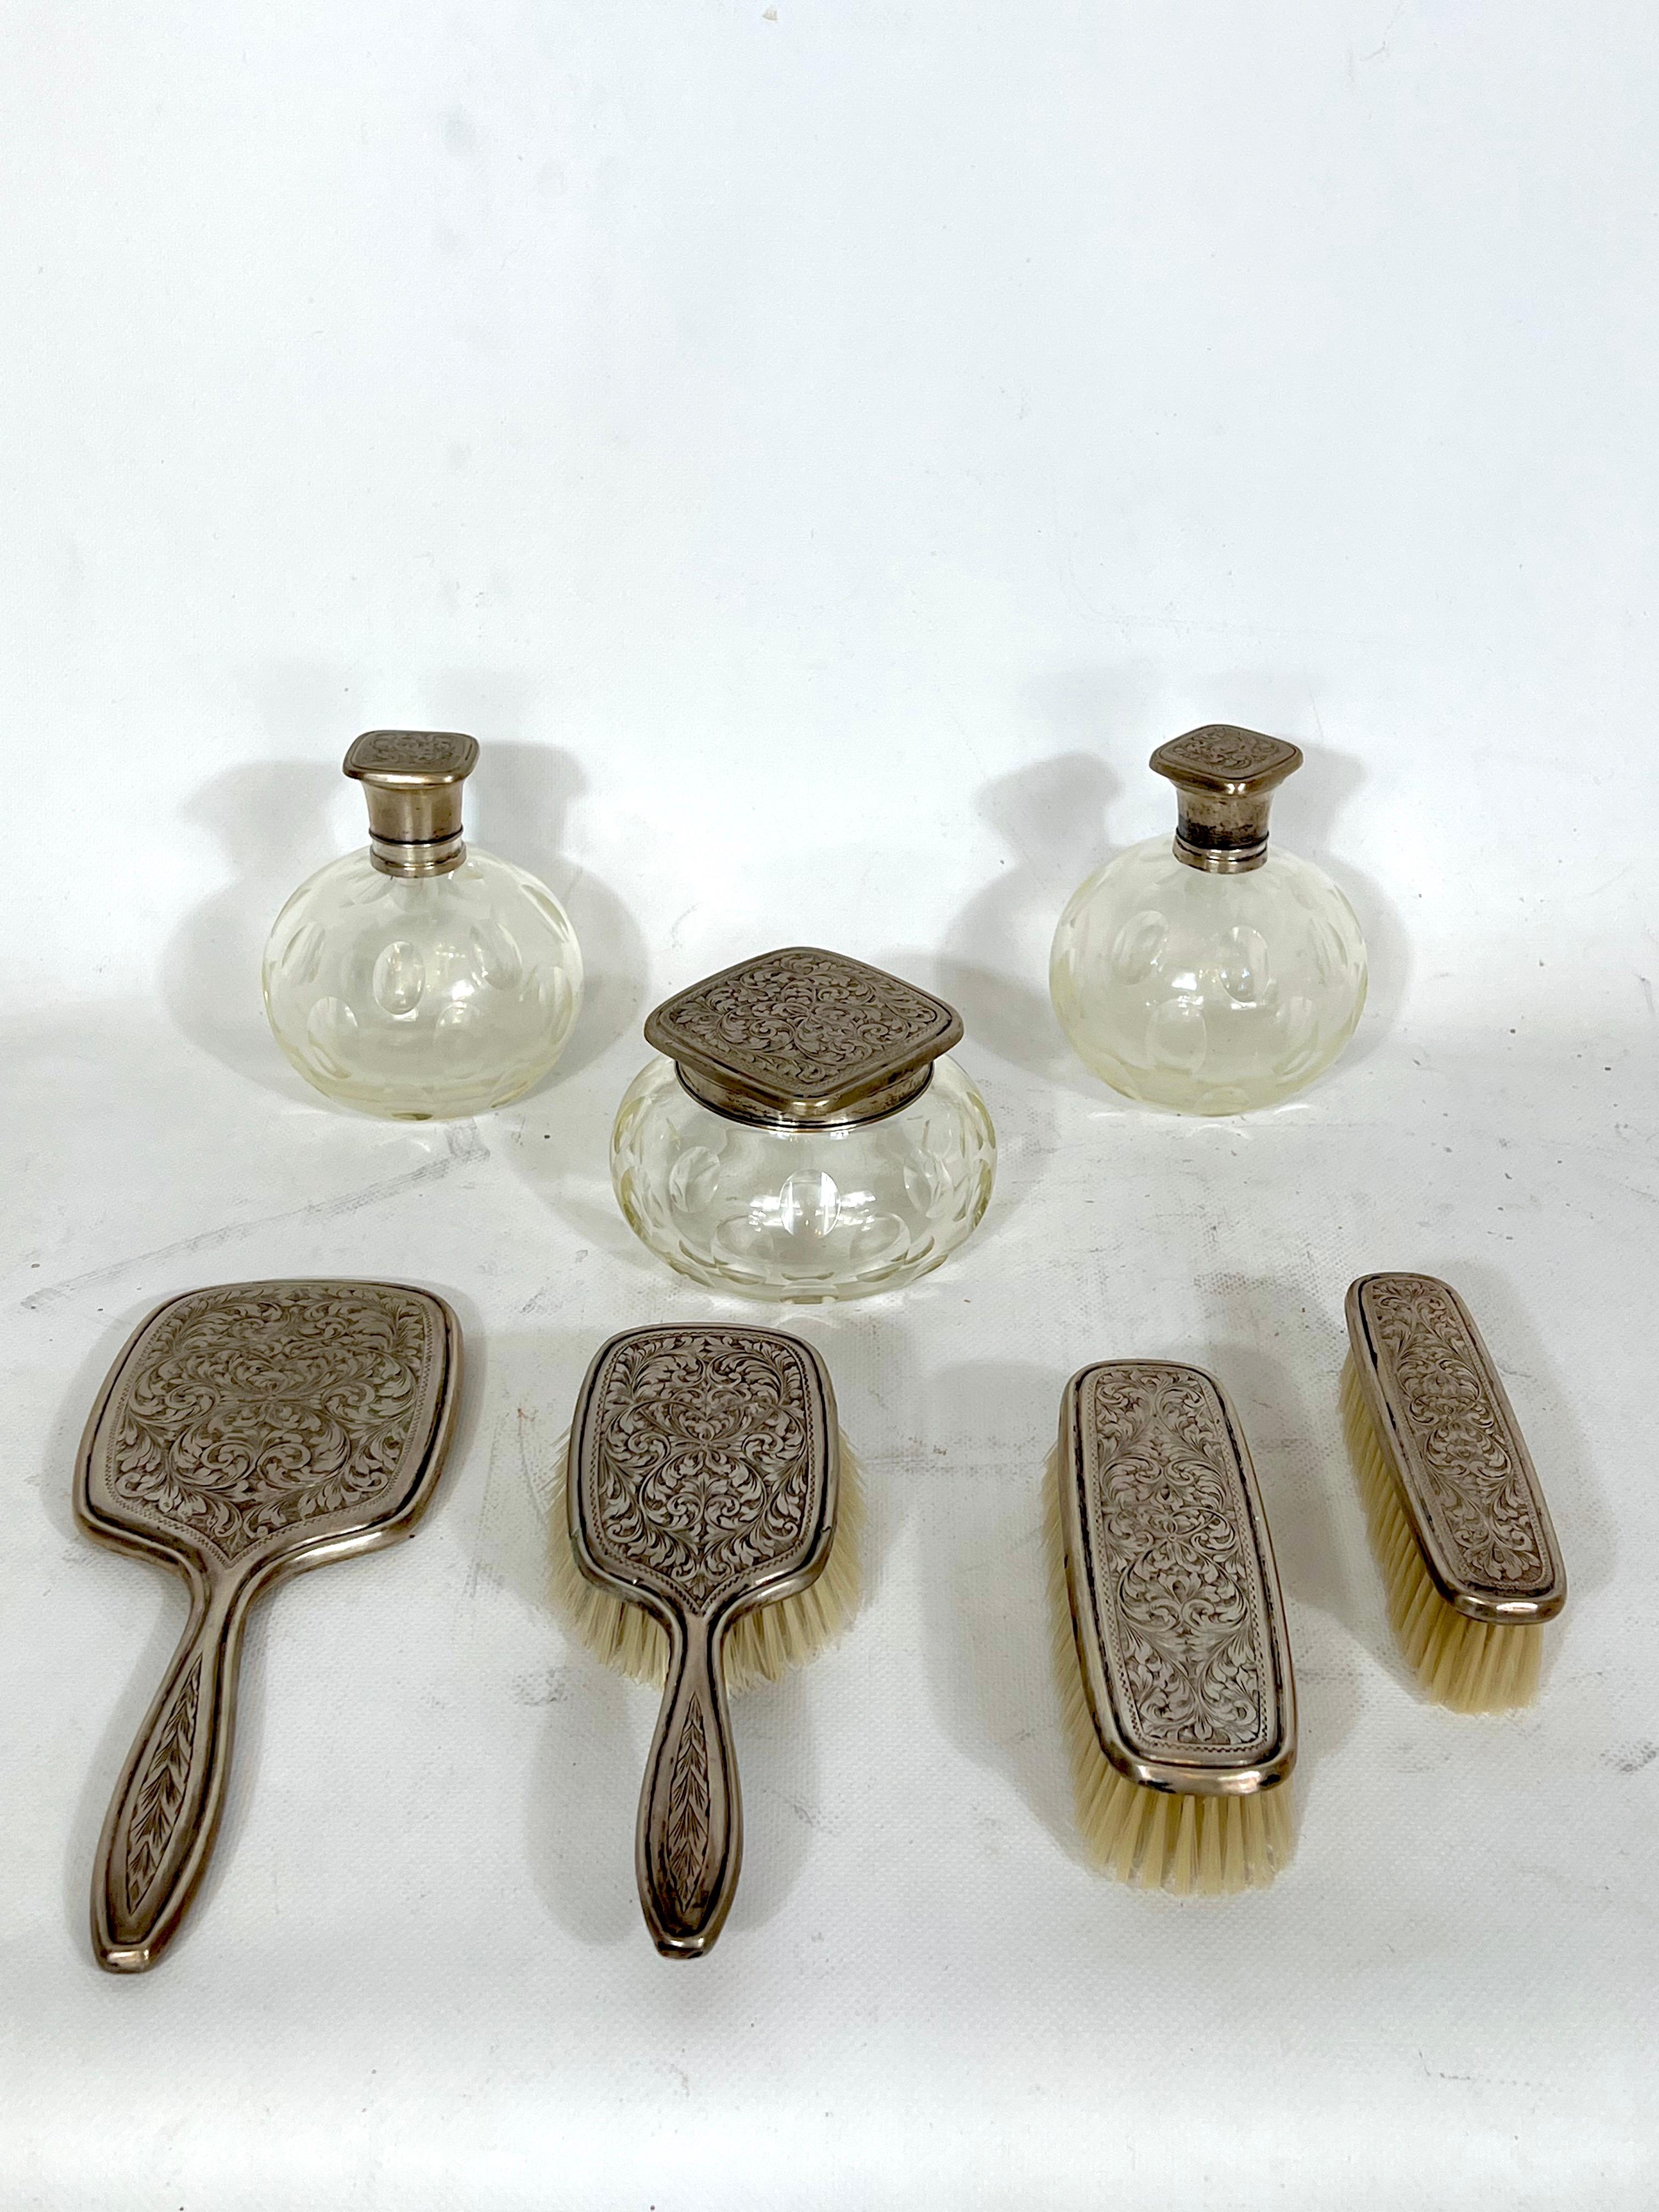 Good vintage condition with normal trace of age and use for this toilet set made from silver plated and blown murano glass.